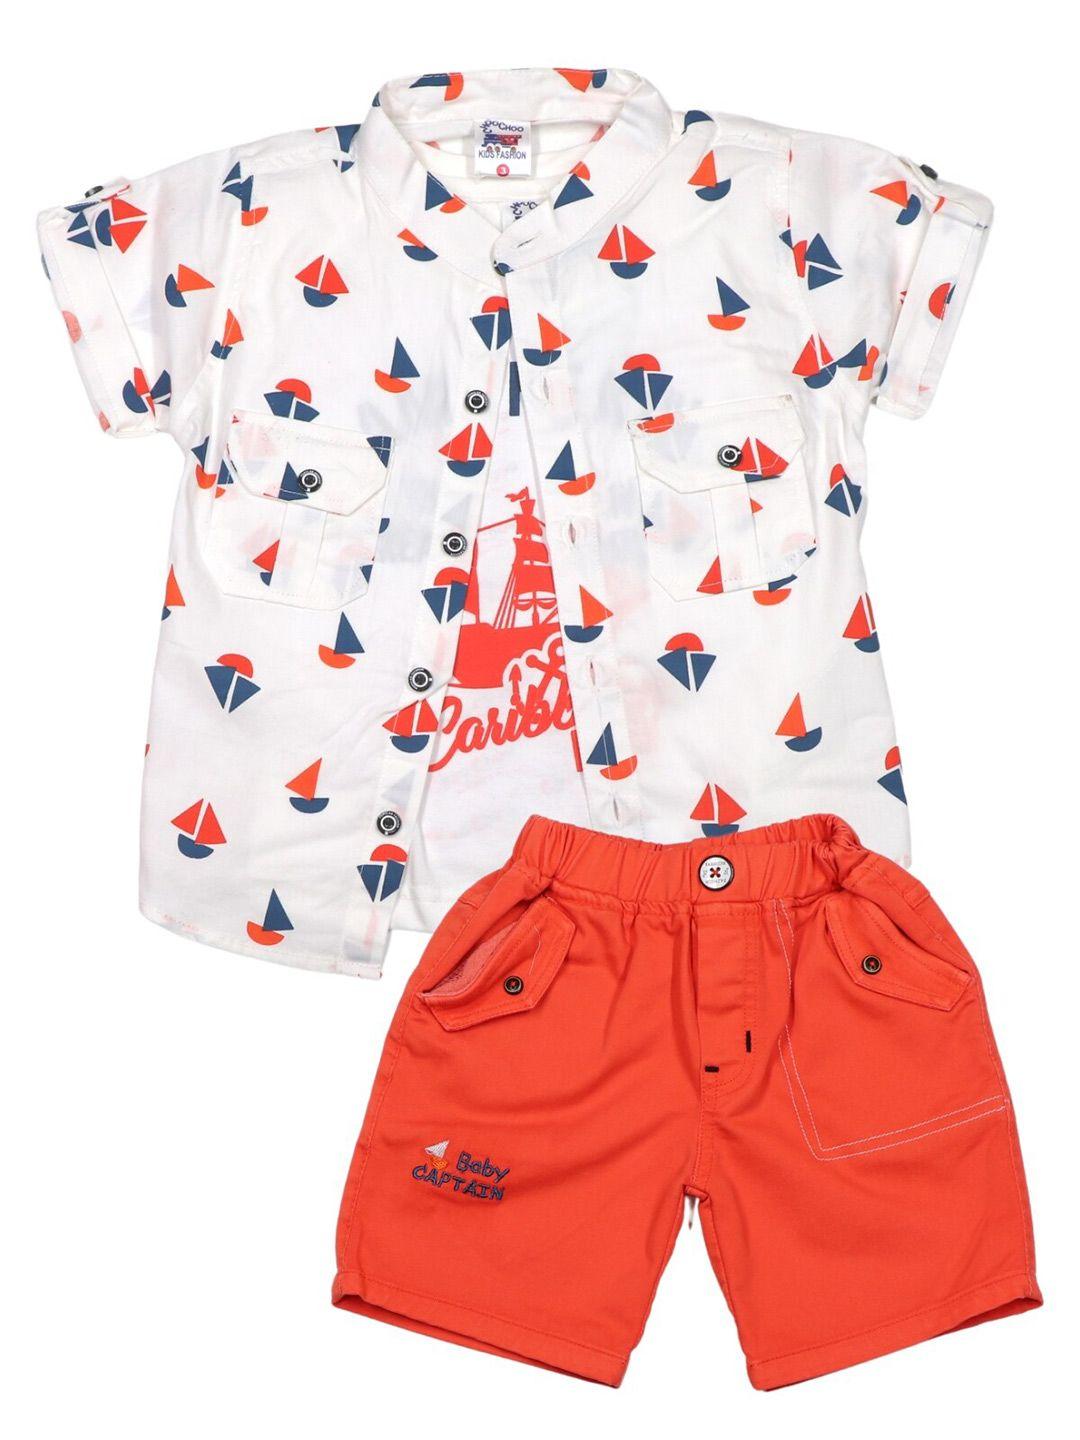 youstylo boys conversational printed shirt with shorts